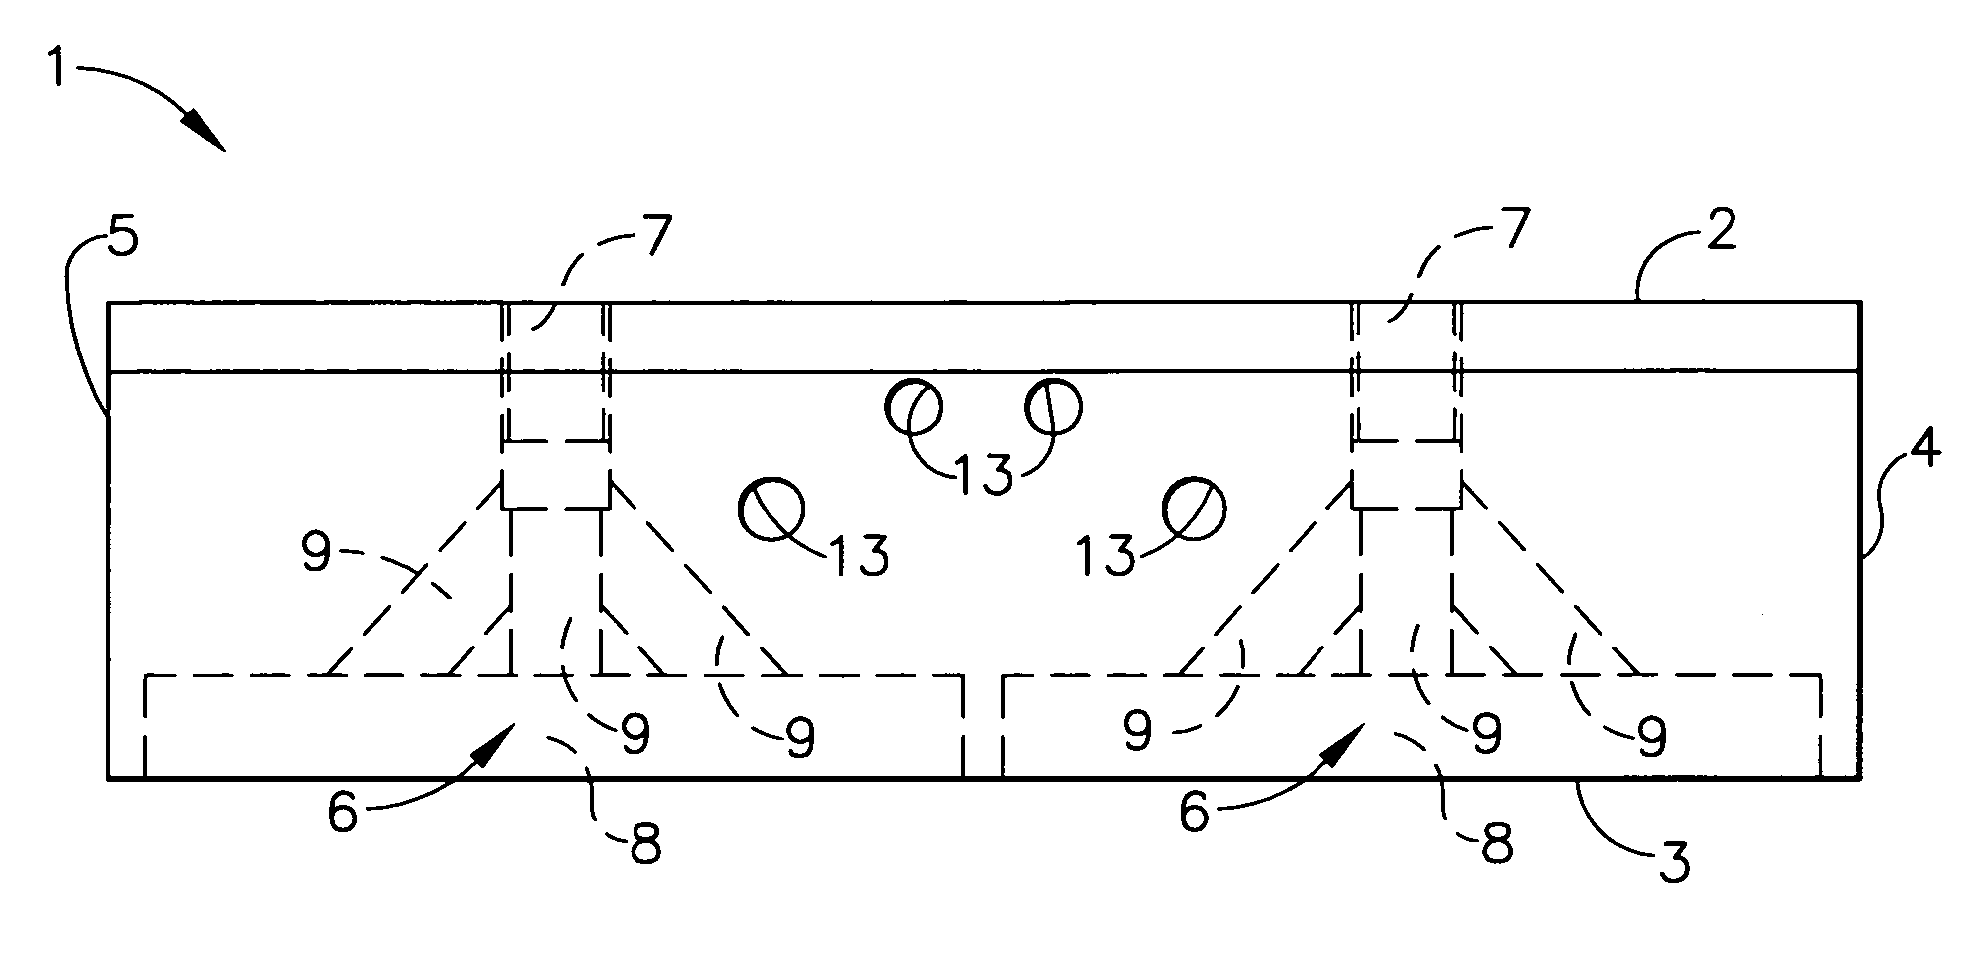 Applicator head for applying fluid material to substrate